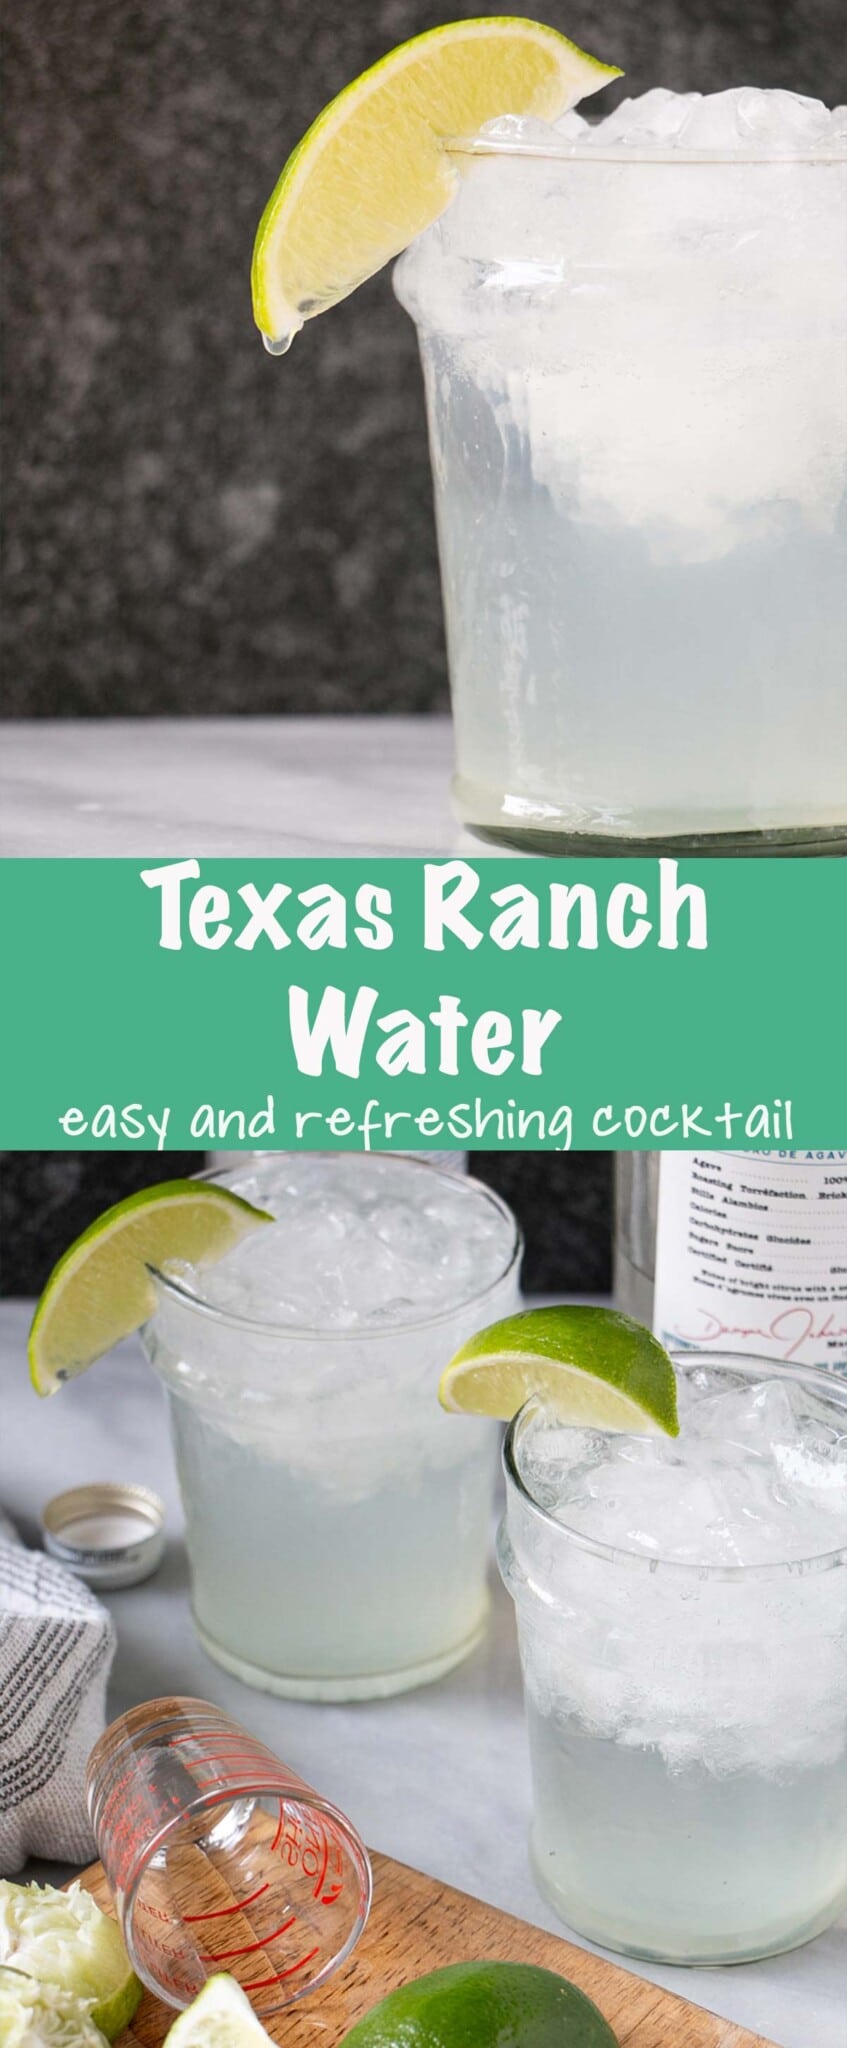 Texas Ranch Water is a highball cocktail made from tequila, lime juice and mineral water. It's refreshing and one of the easiest cocktails to make this Summer! via @mykitchenlove